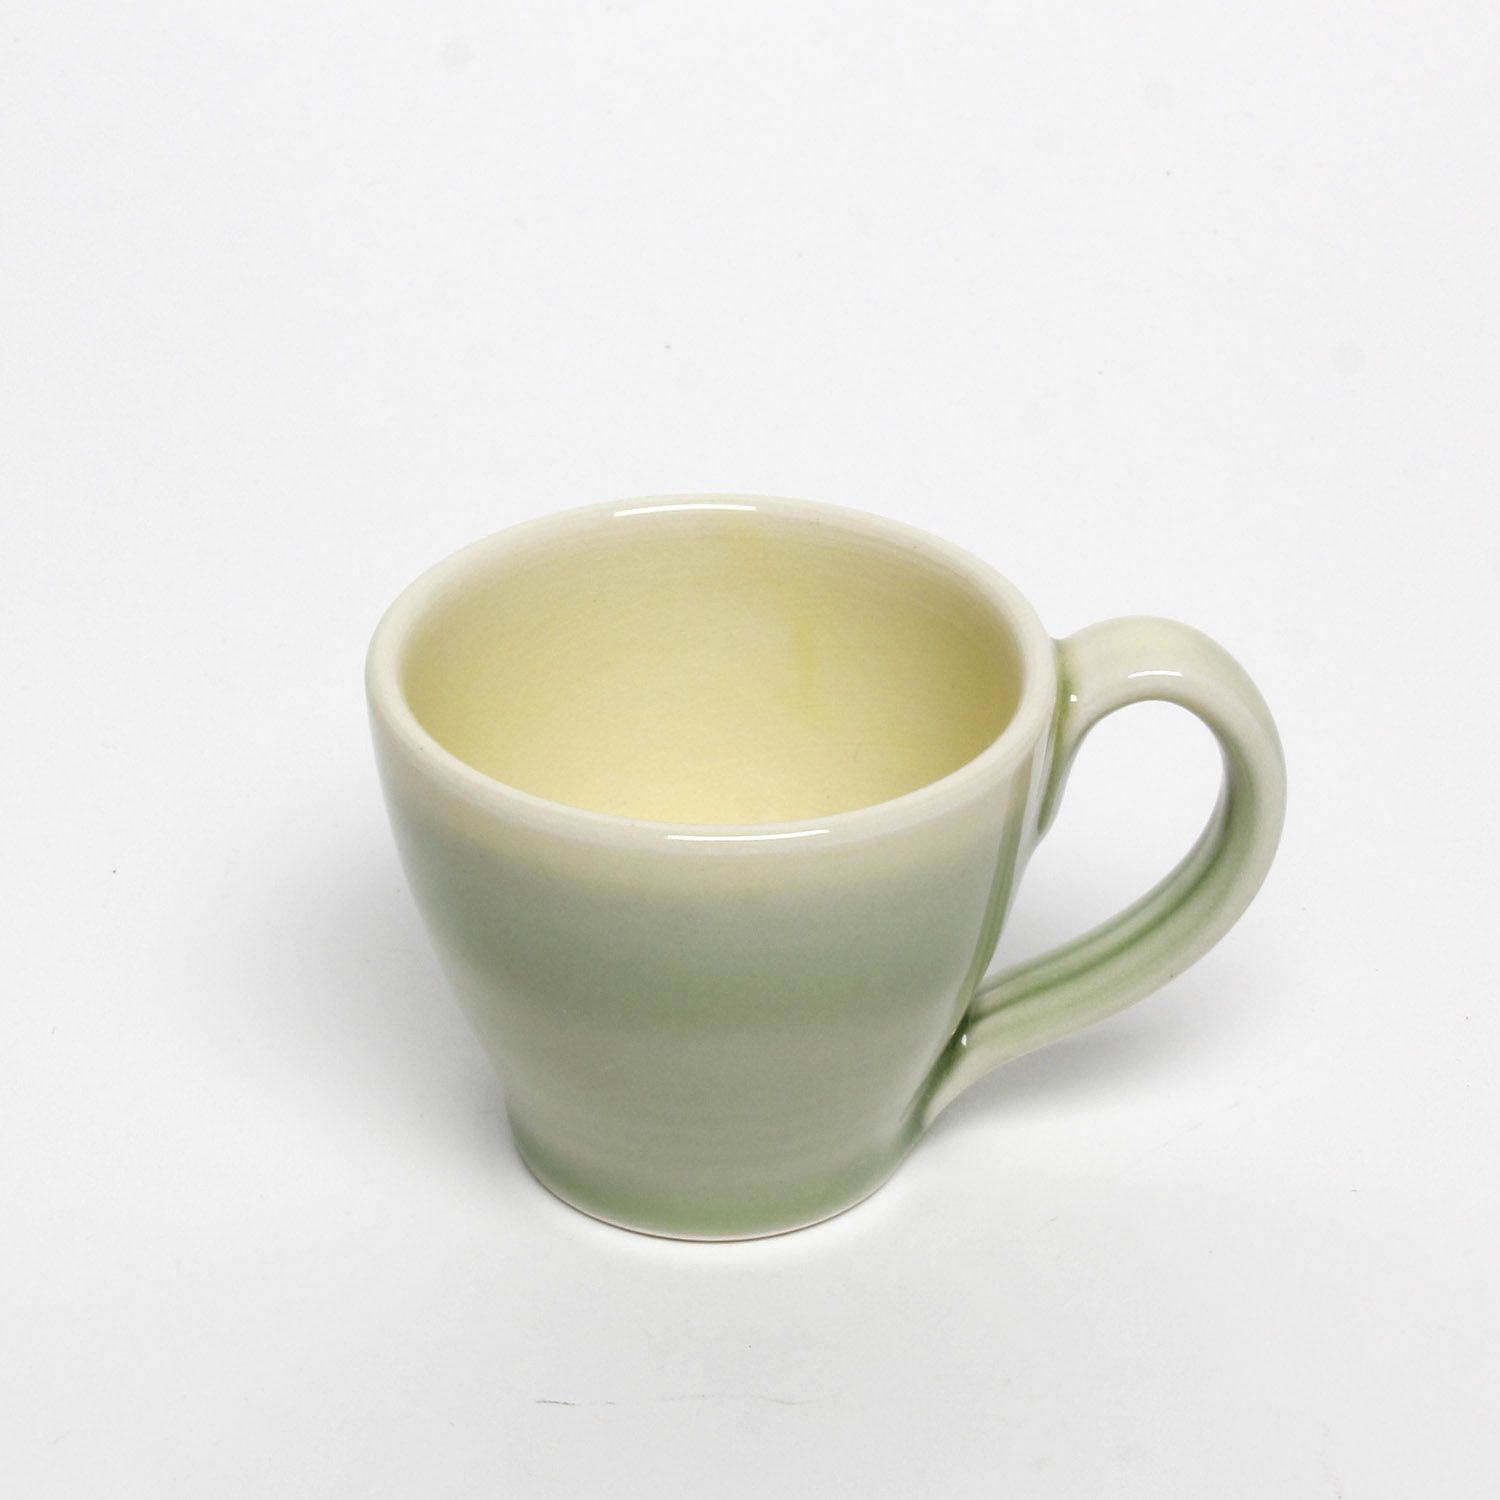 Thomas Aitken: Green Espresso Cup Product Image 5 of 5